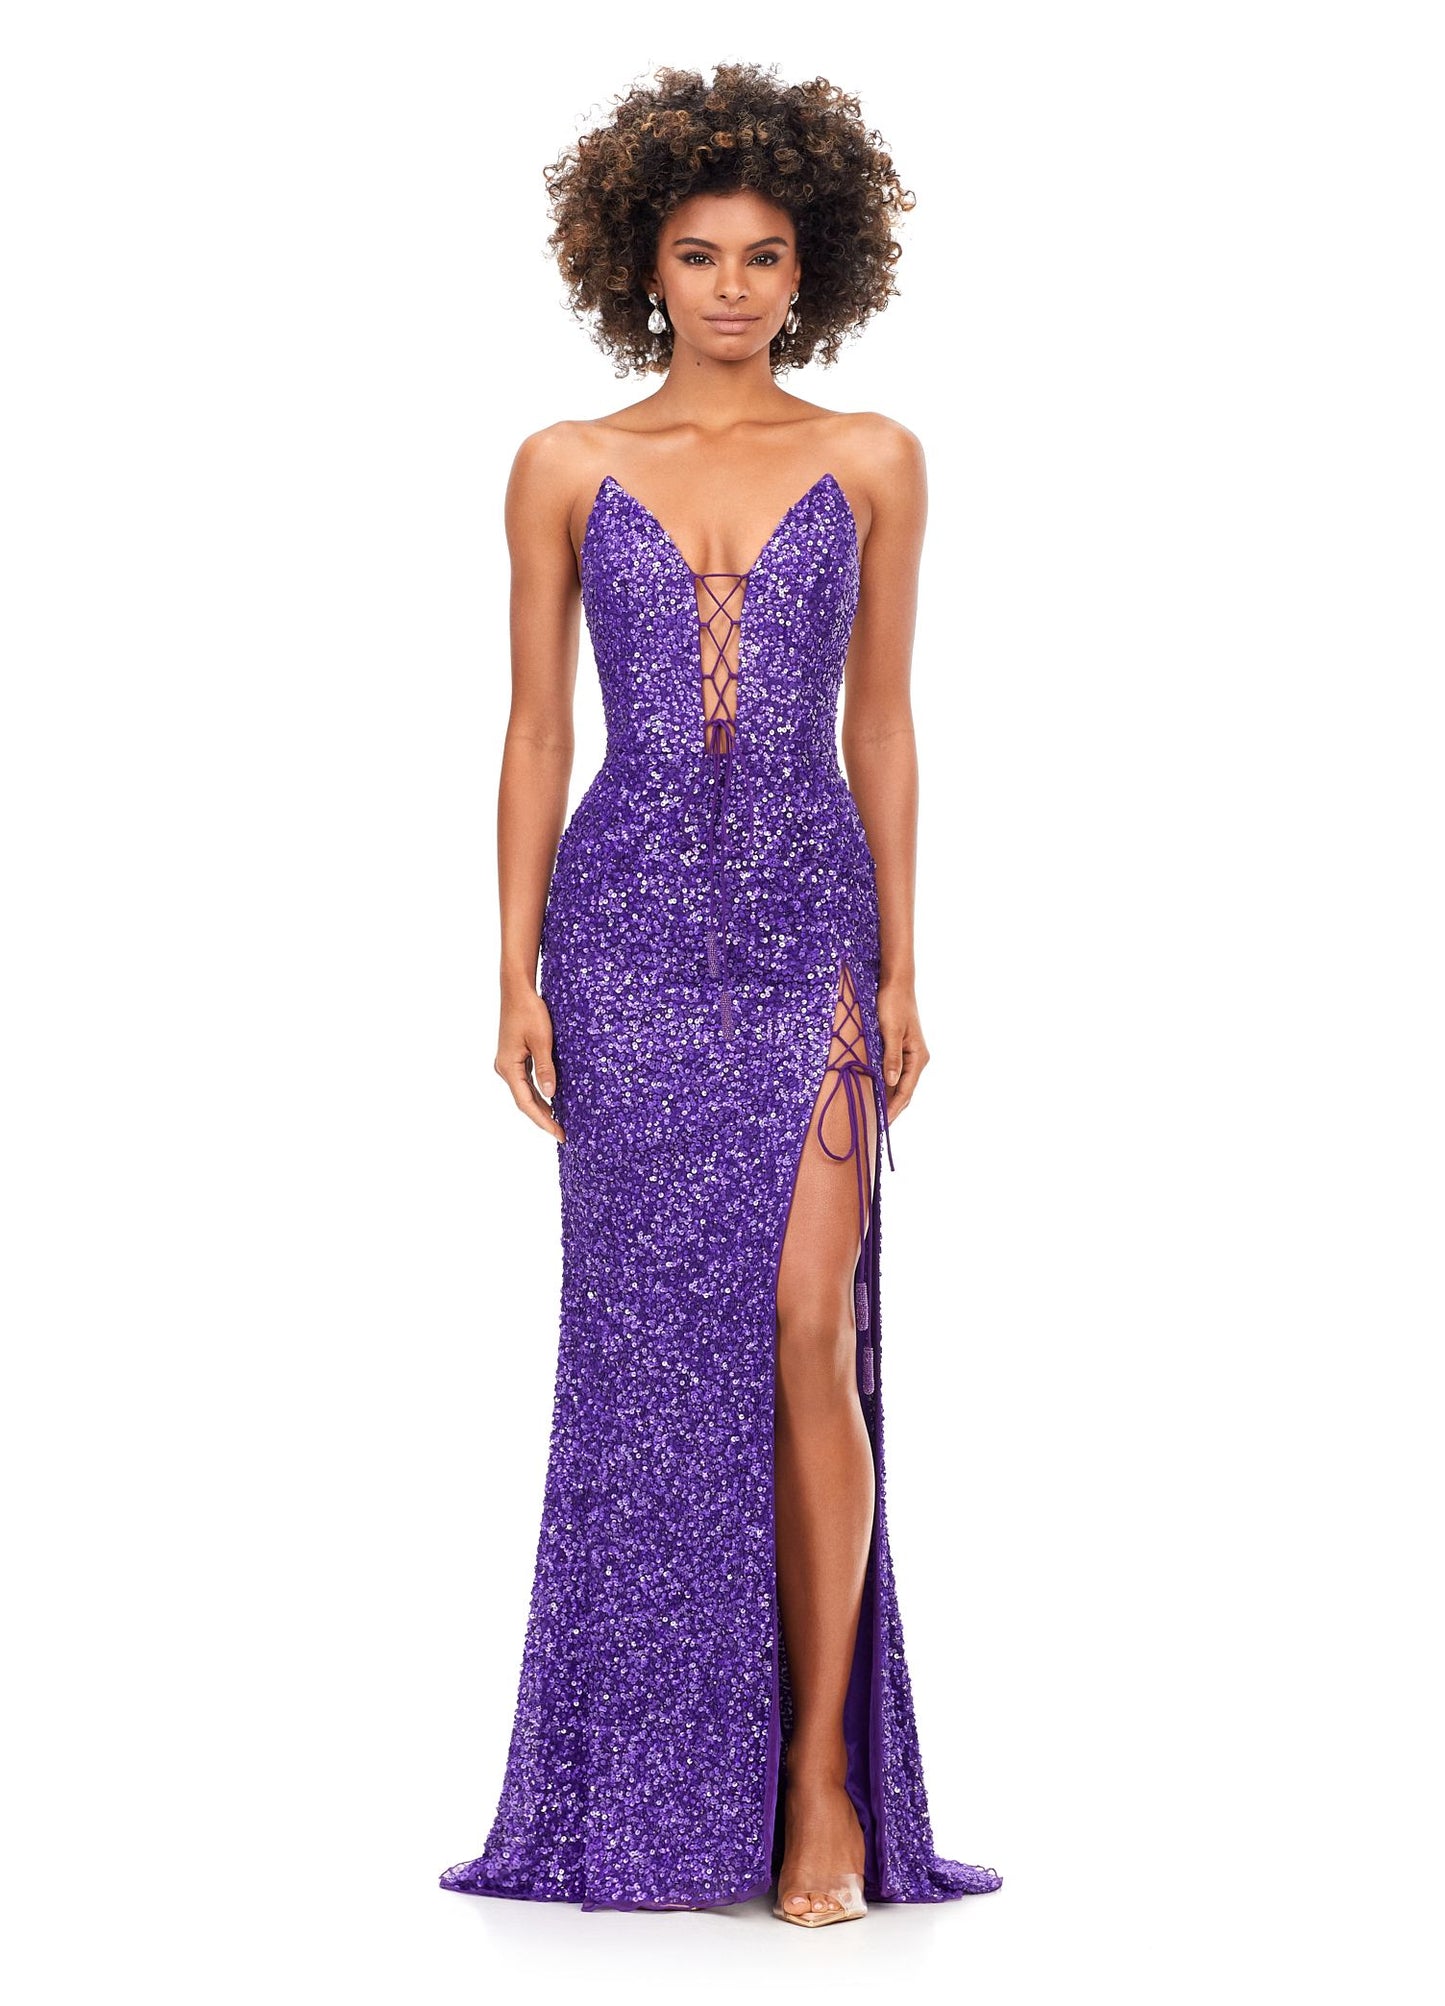 Ashley Lauren 11292 Strapless Sequin Prom Dress with Lace Up Bustier